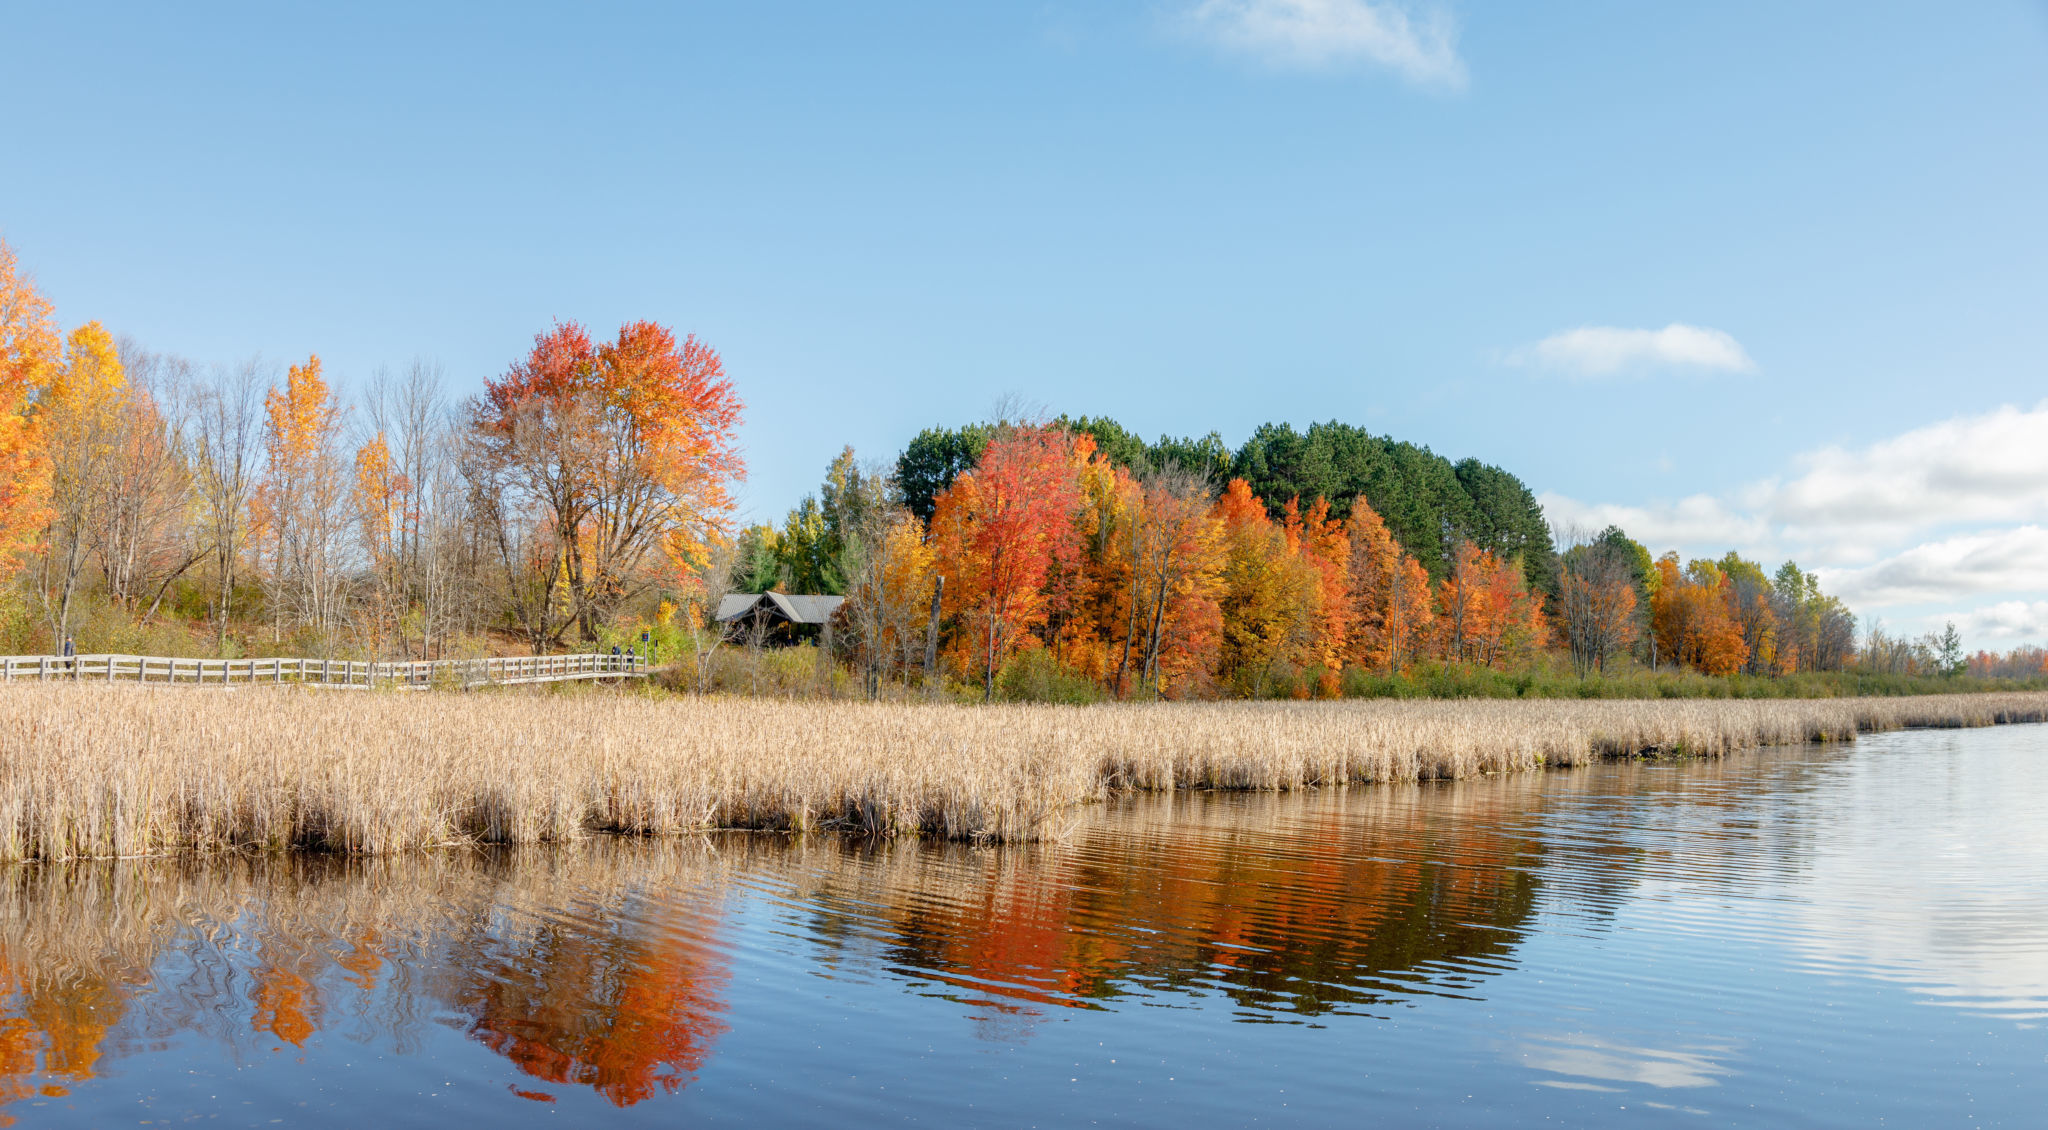 Fall foliage with a body of water